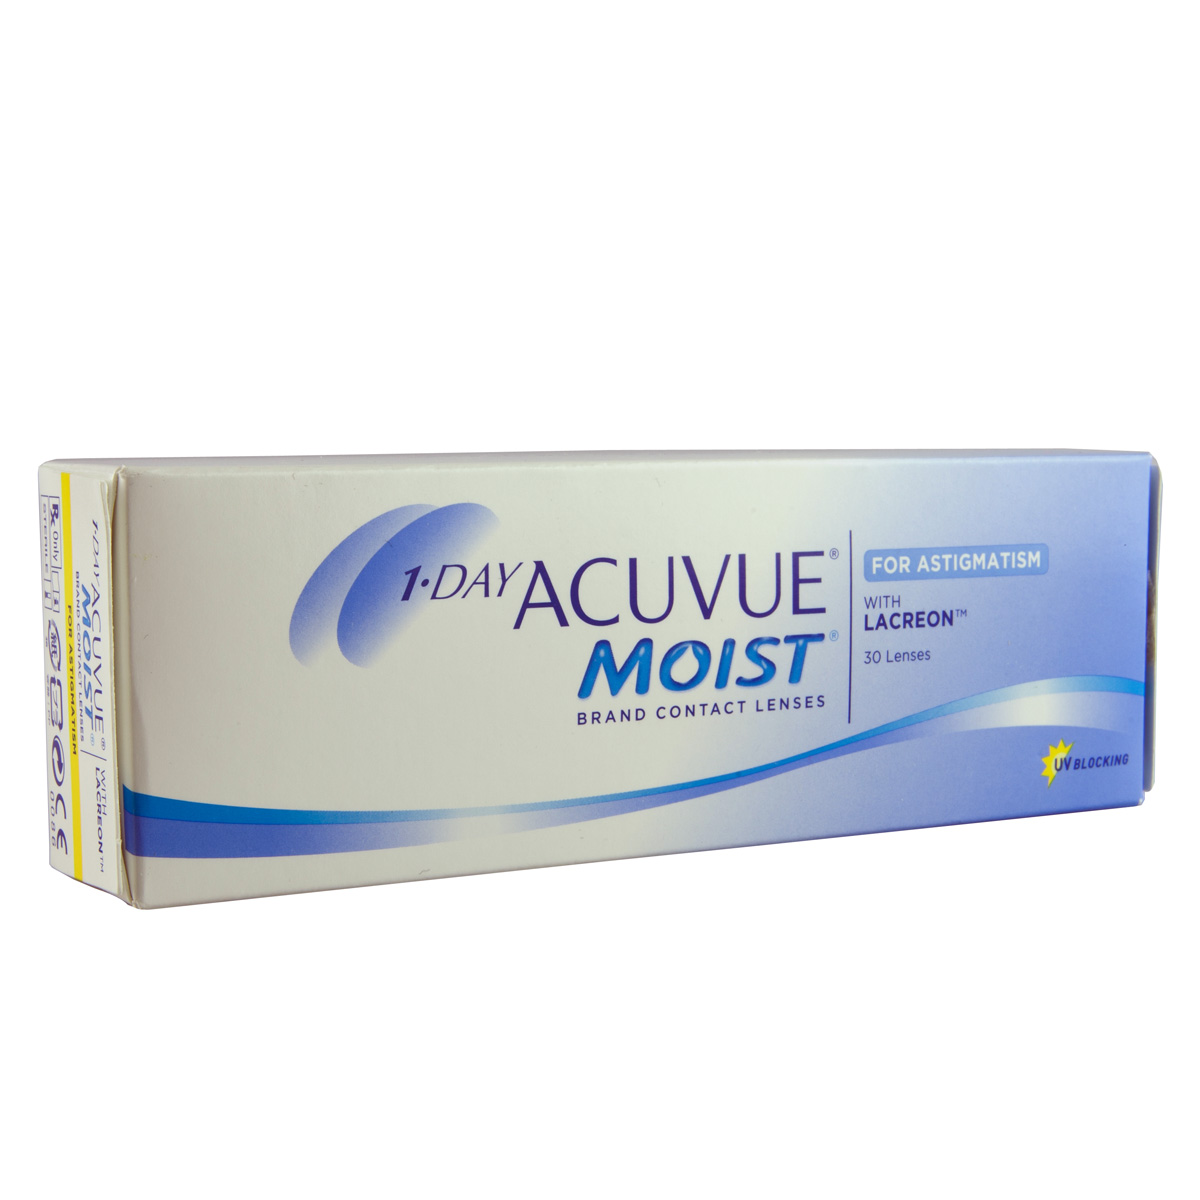 Image of 1 Day Acuvue Moist for Astigmatism 30 lenses